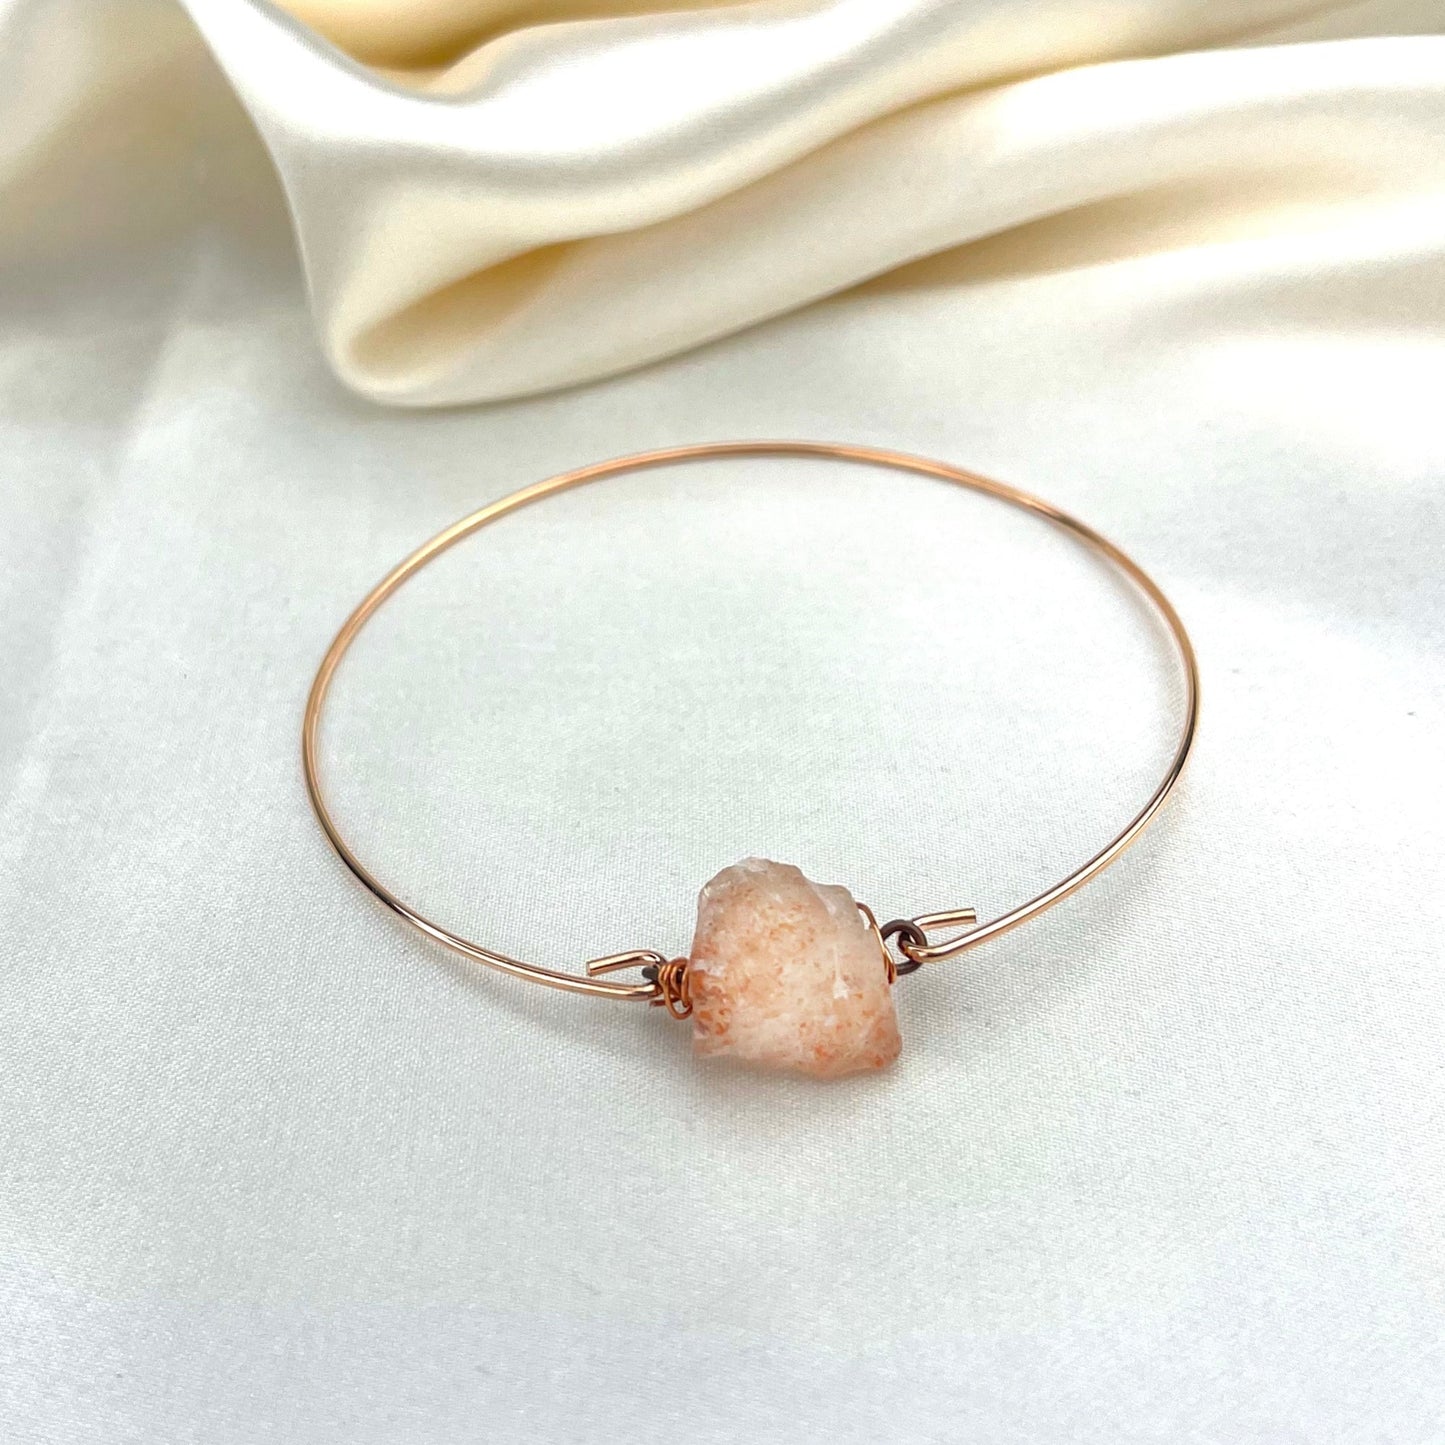 Rosè gilded bangle with carnelol